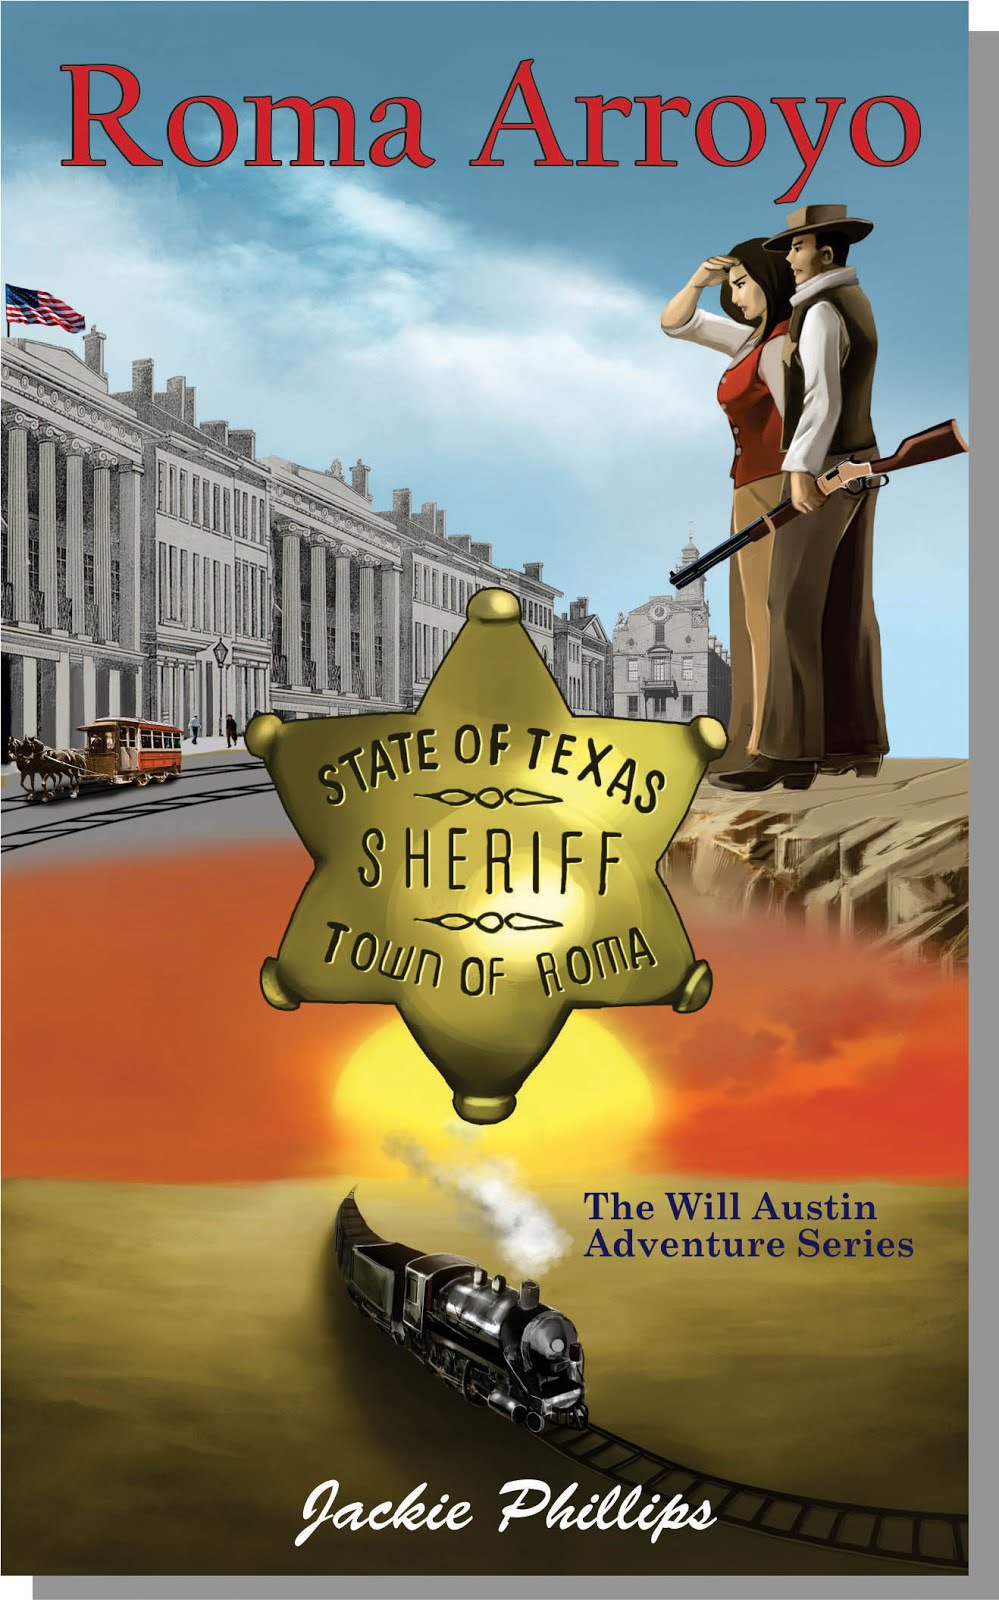 Click here to find out more about the Will Austin adventure series!